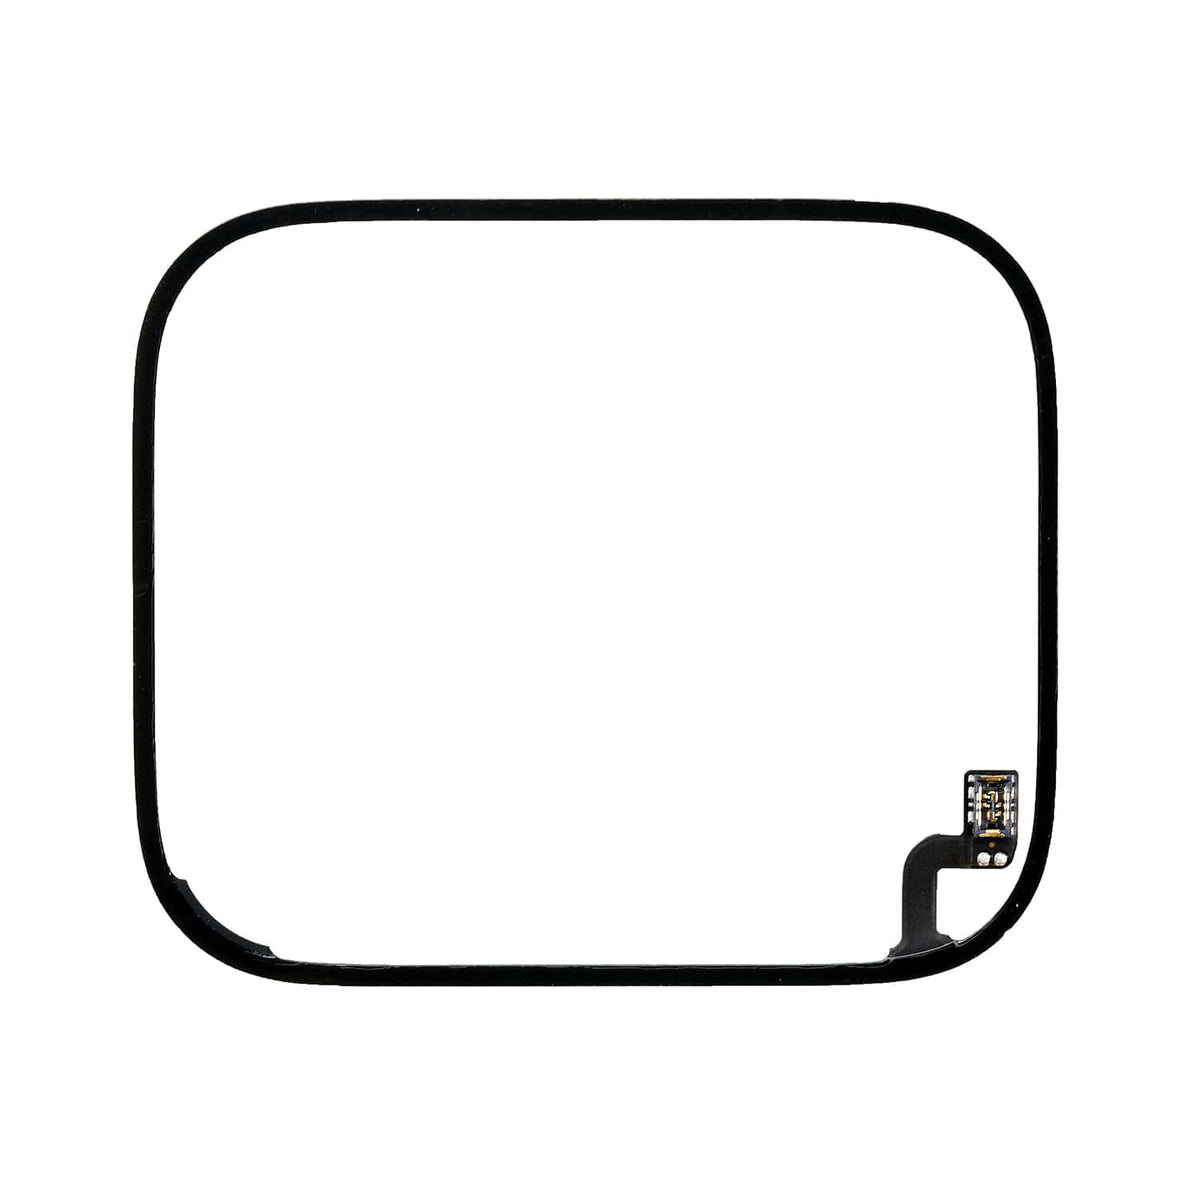 FORCE TOUCH SENSOR ADHESIVE FOR APPLE WATCH SERIES 4TH GPS 40MM